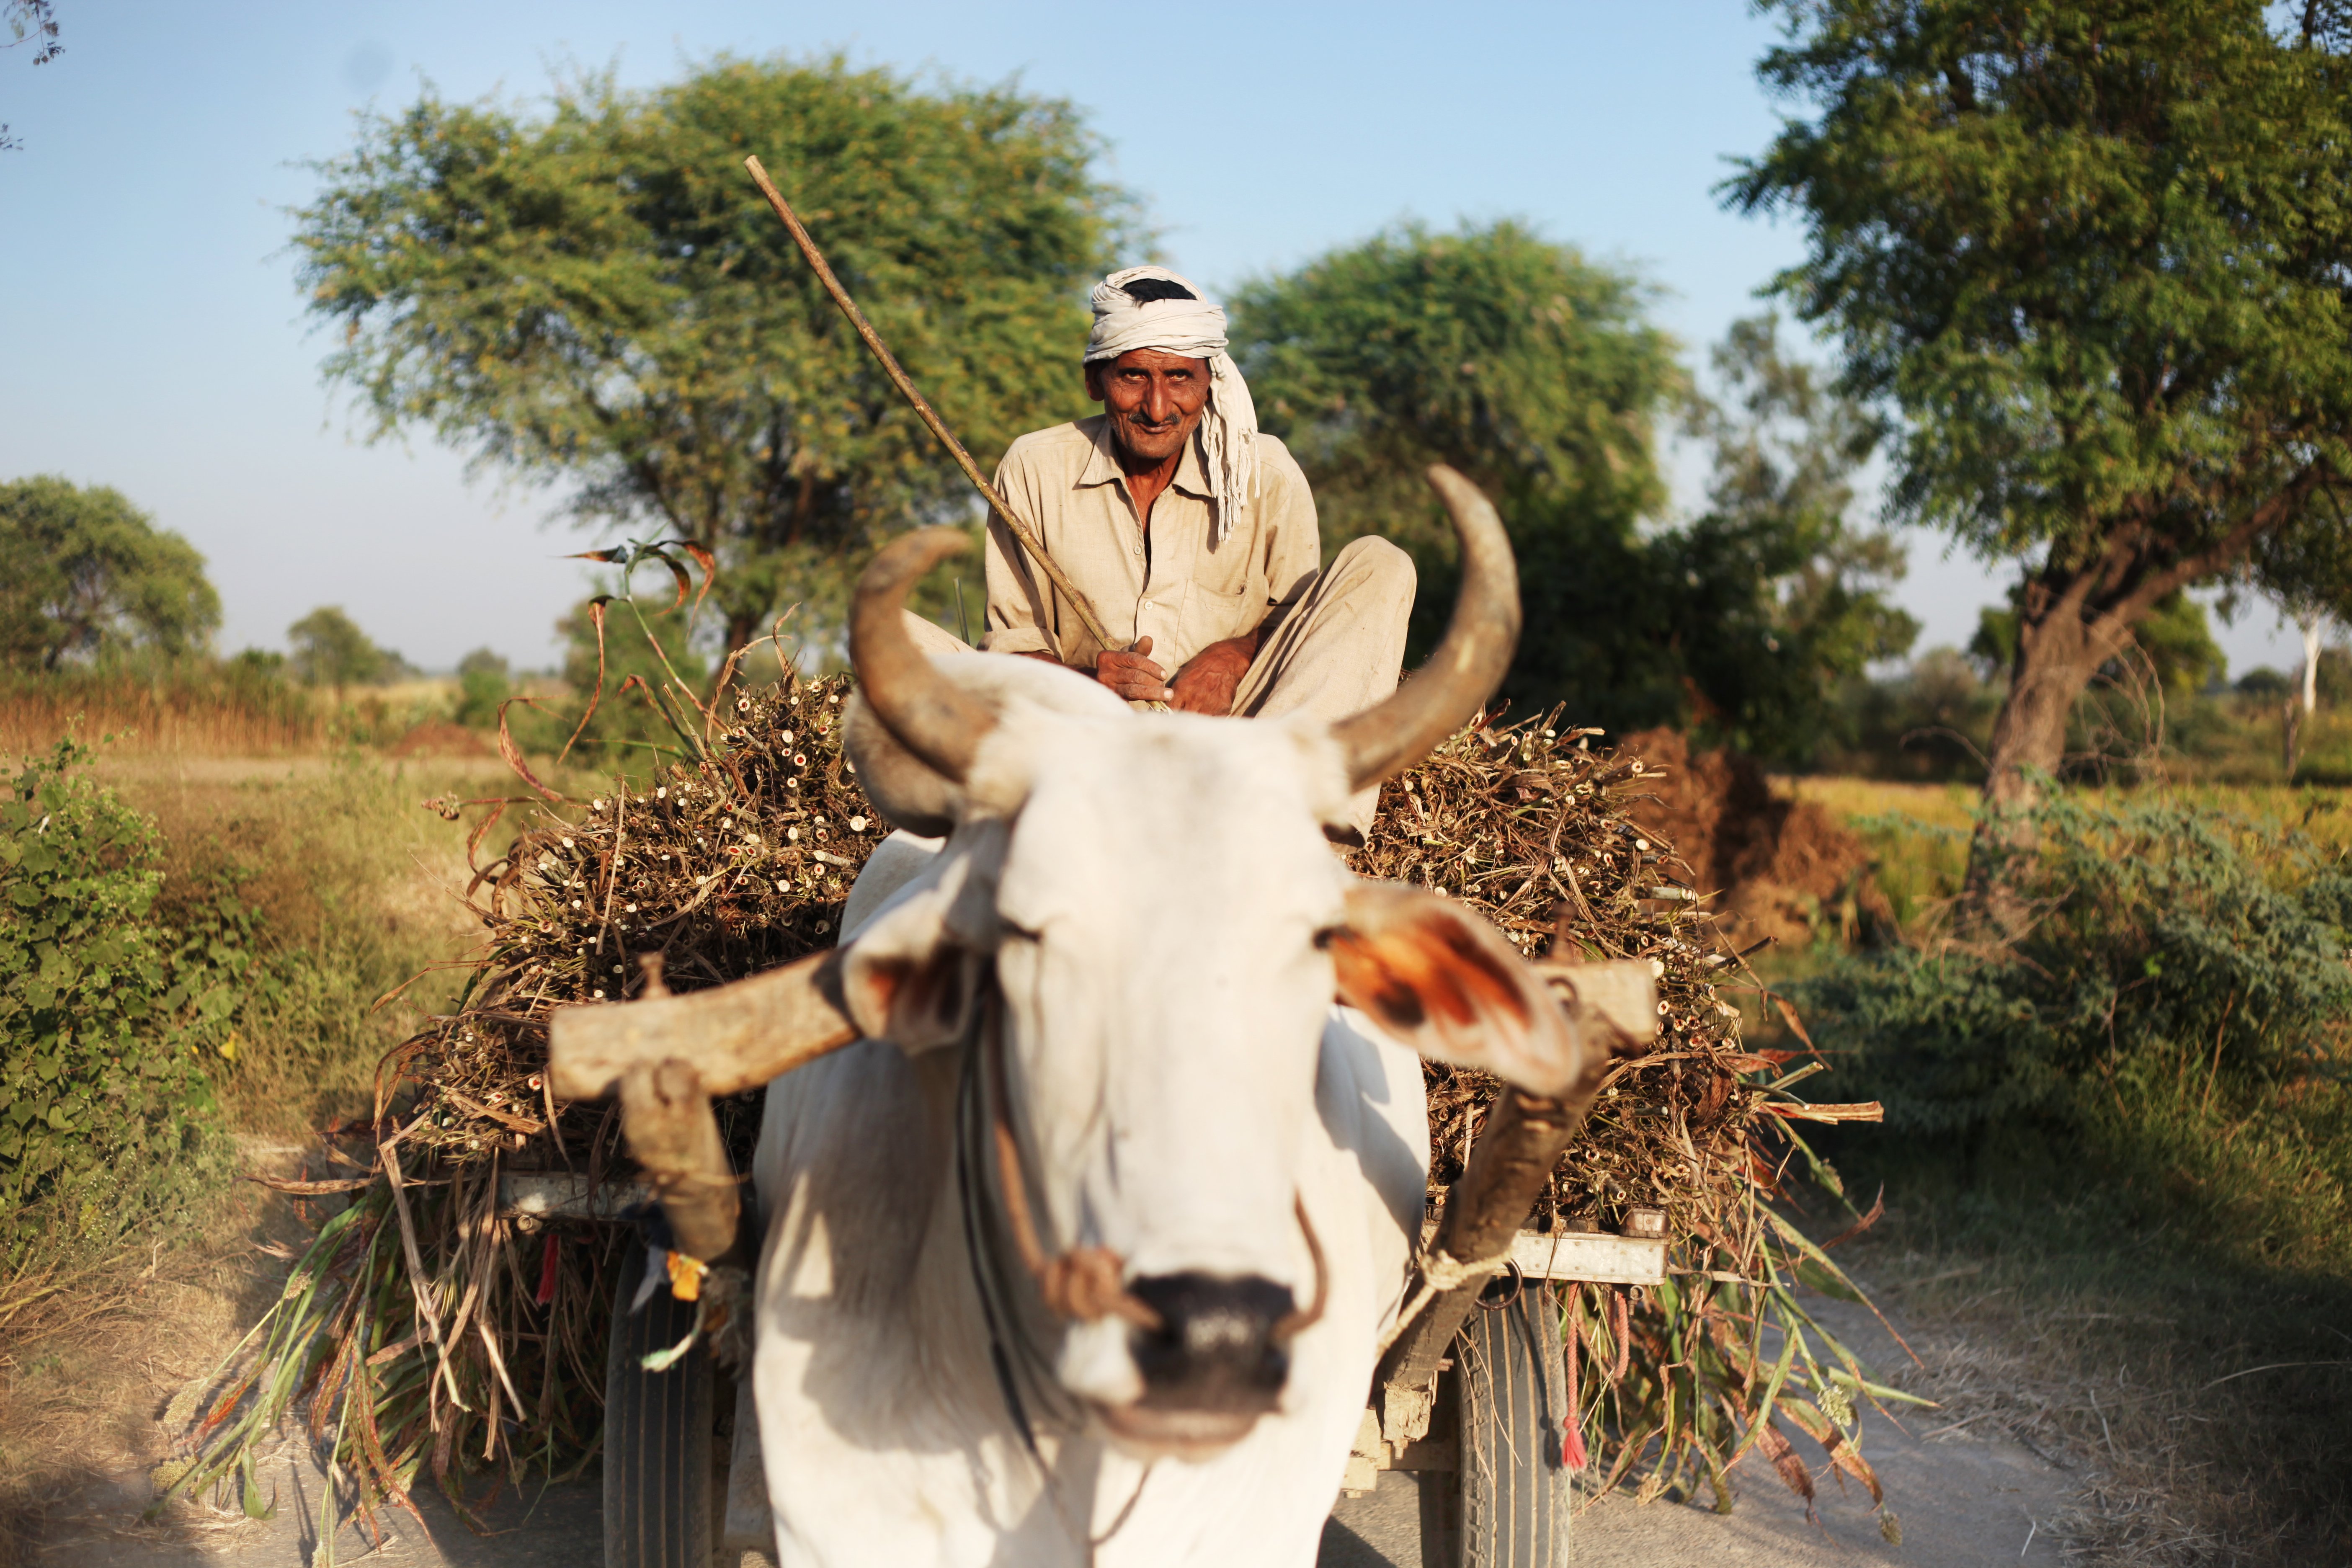 Indian farmer riding loaded ox cart on road in rural India | Photo : Getty Images